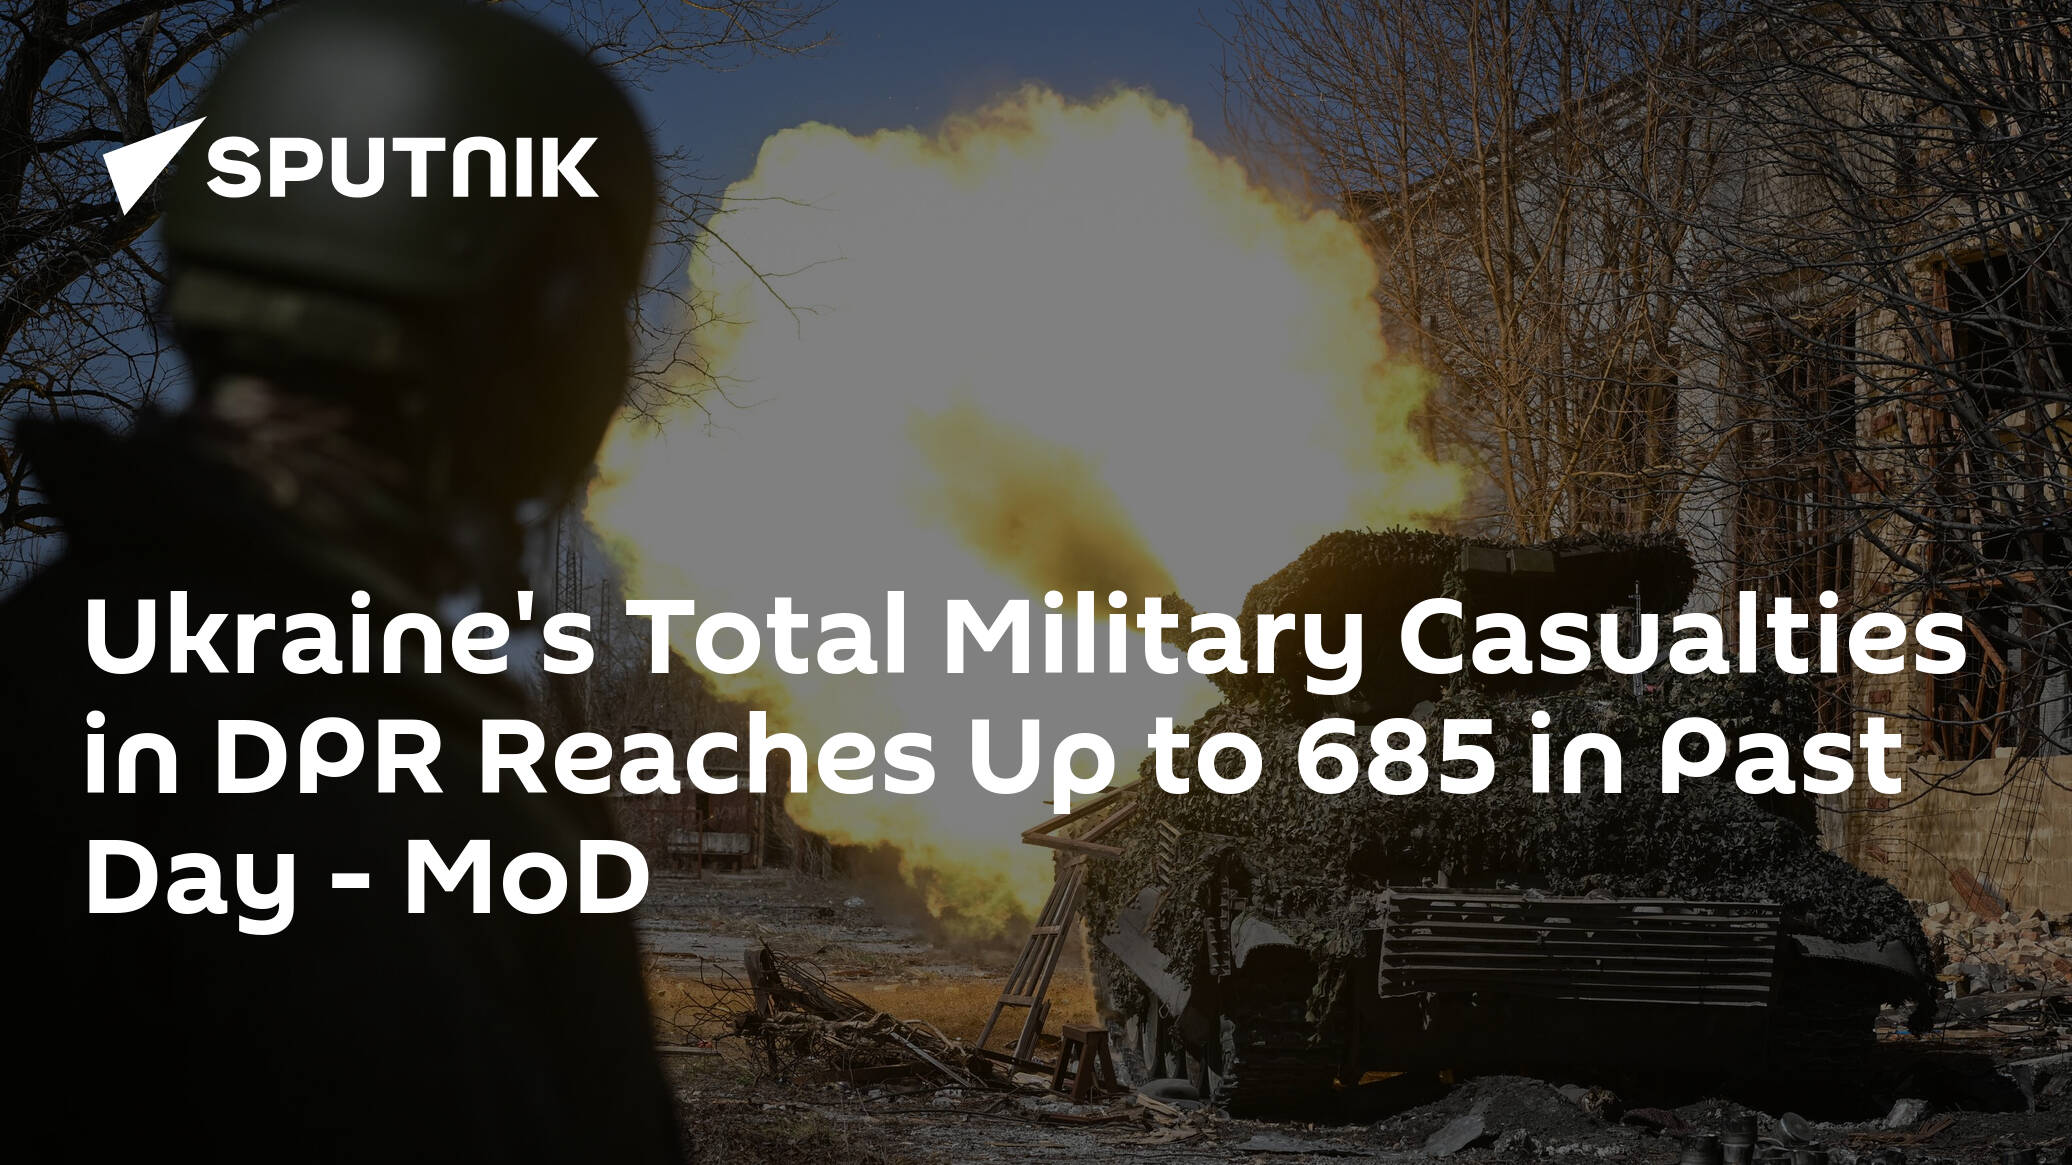 Ukraine's Total Military Casualties in DPR Reaches Up to 685 in Past Day – MoD